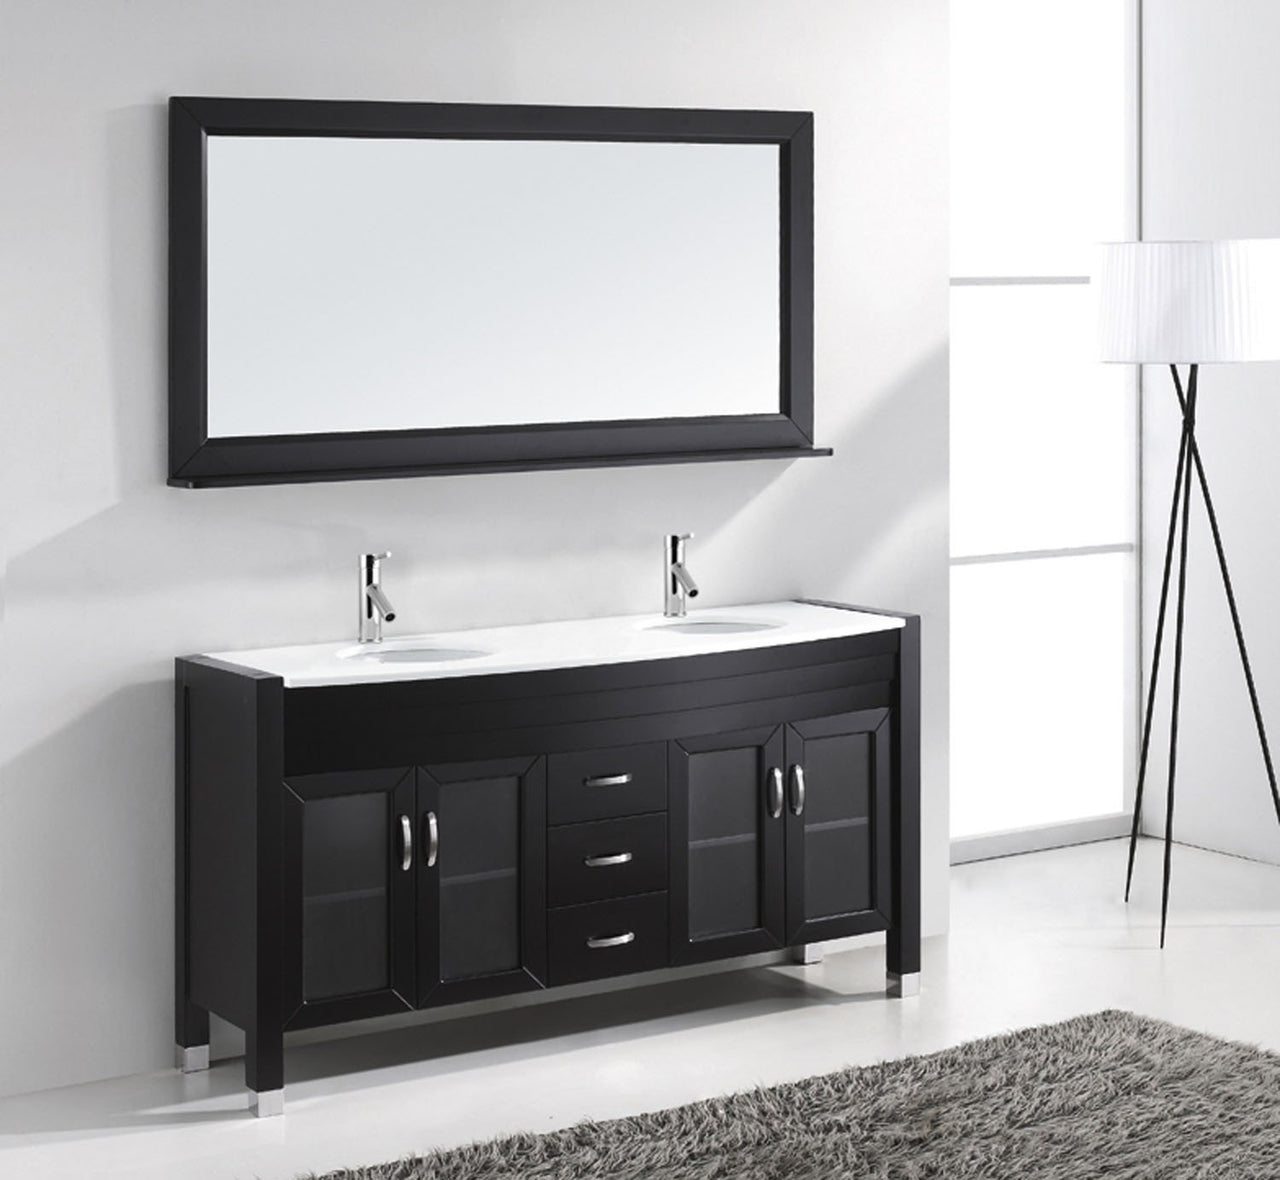 Virtu USA Ava 63" Double Round Sink Espresso Top Vanity in Espresso with Brushed Nickel Faucet and Mirror Vanity Virtu USA 